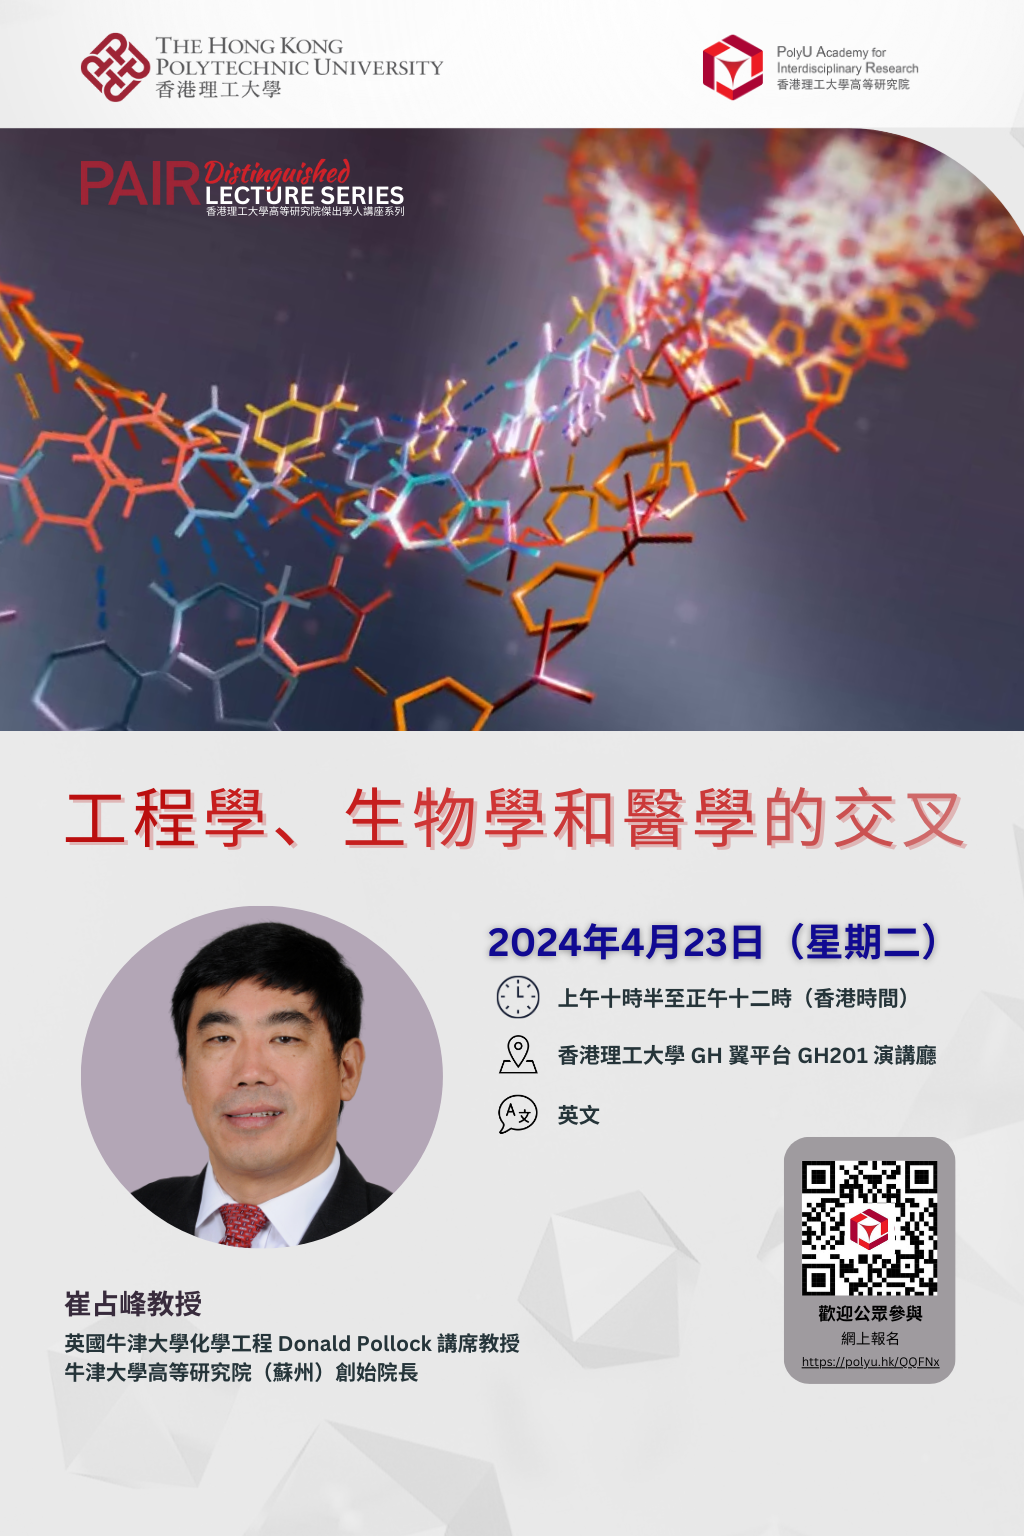 DLS by Prof CUI Zhanfeng on 23 April 20241024 x 1536 pxTC